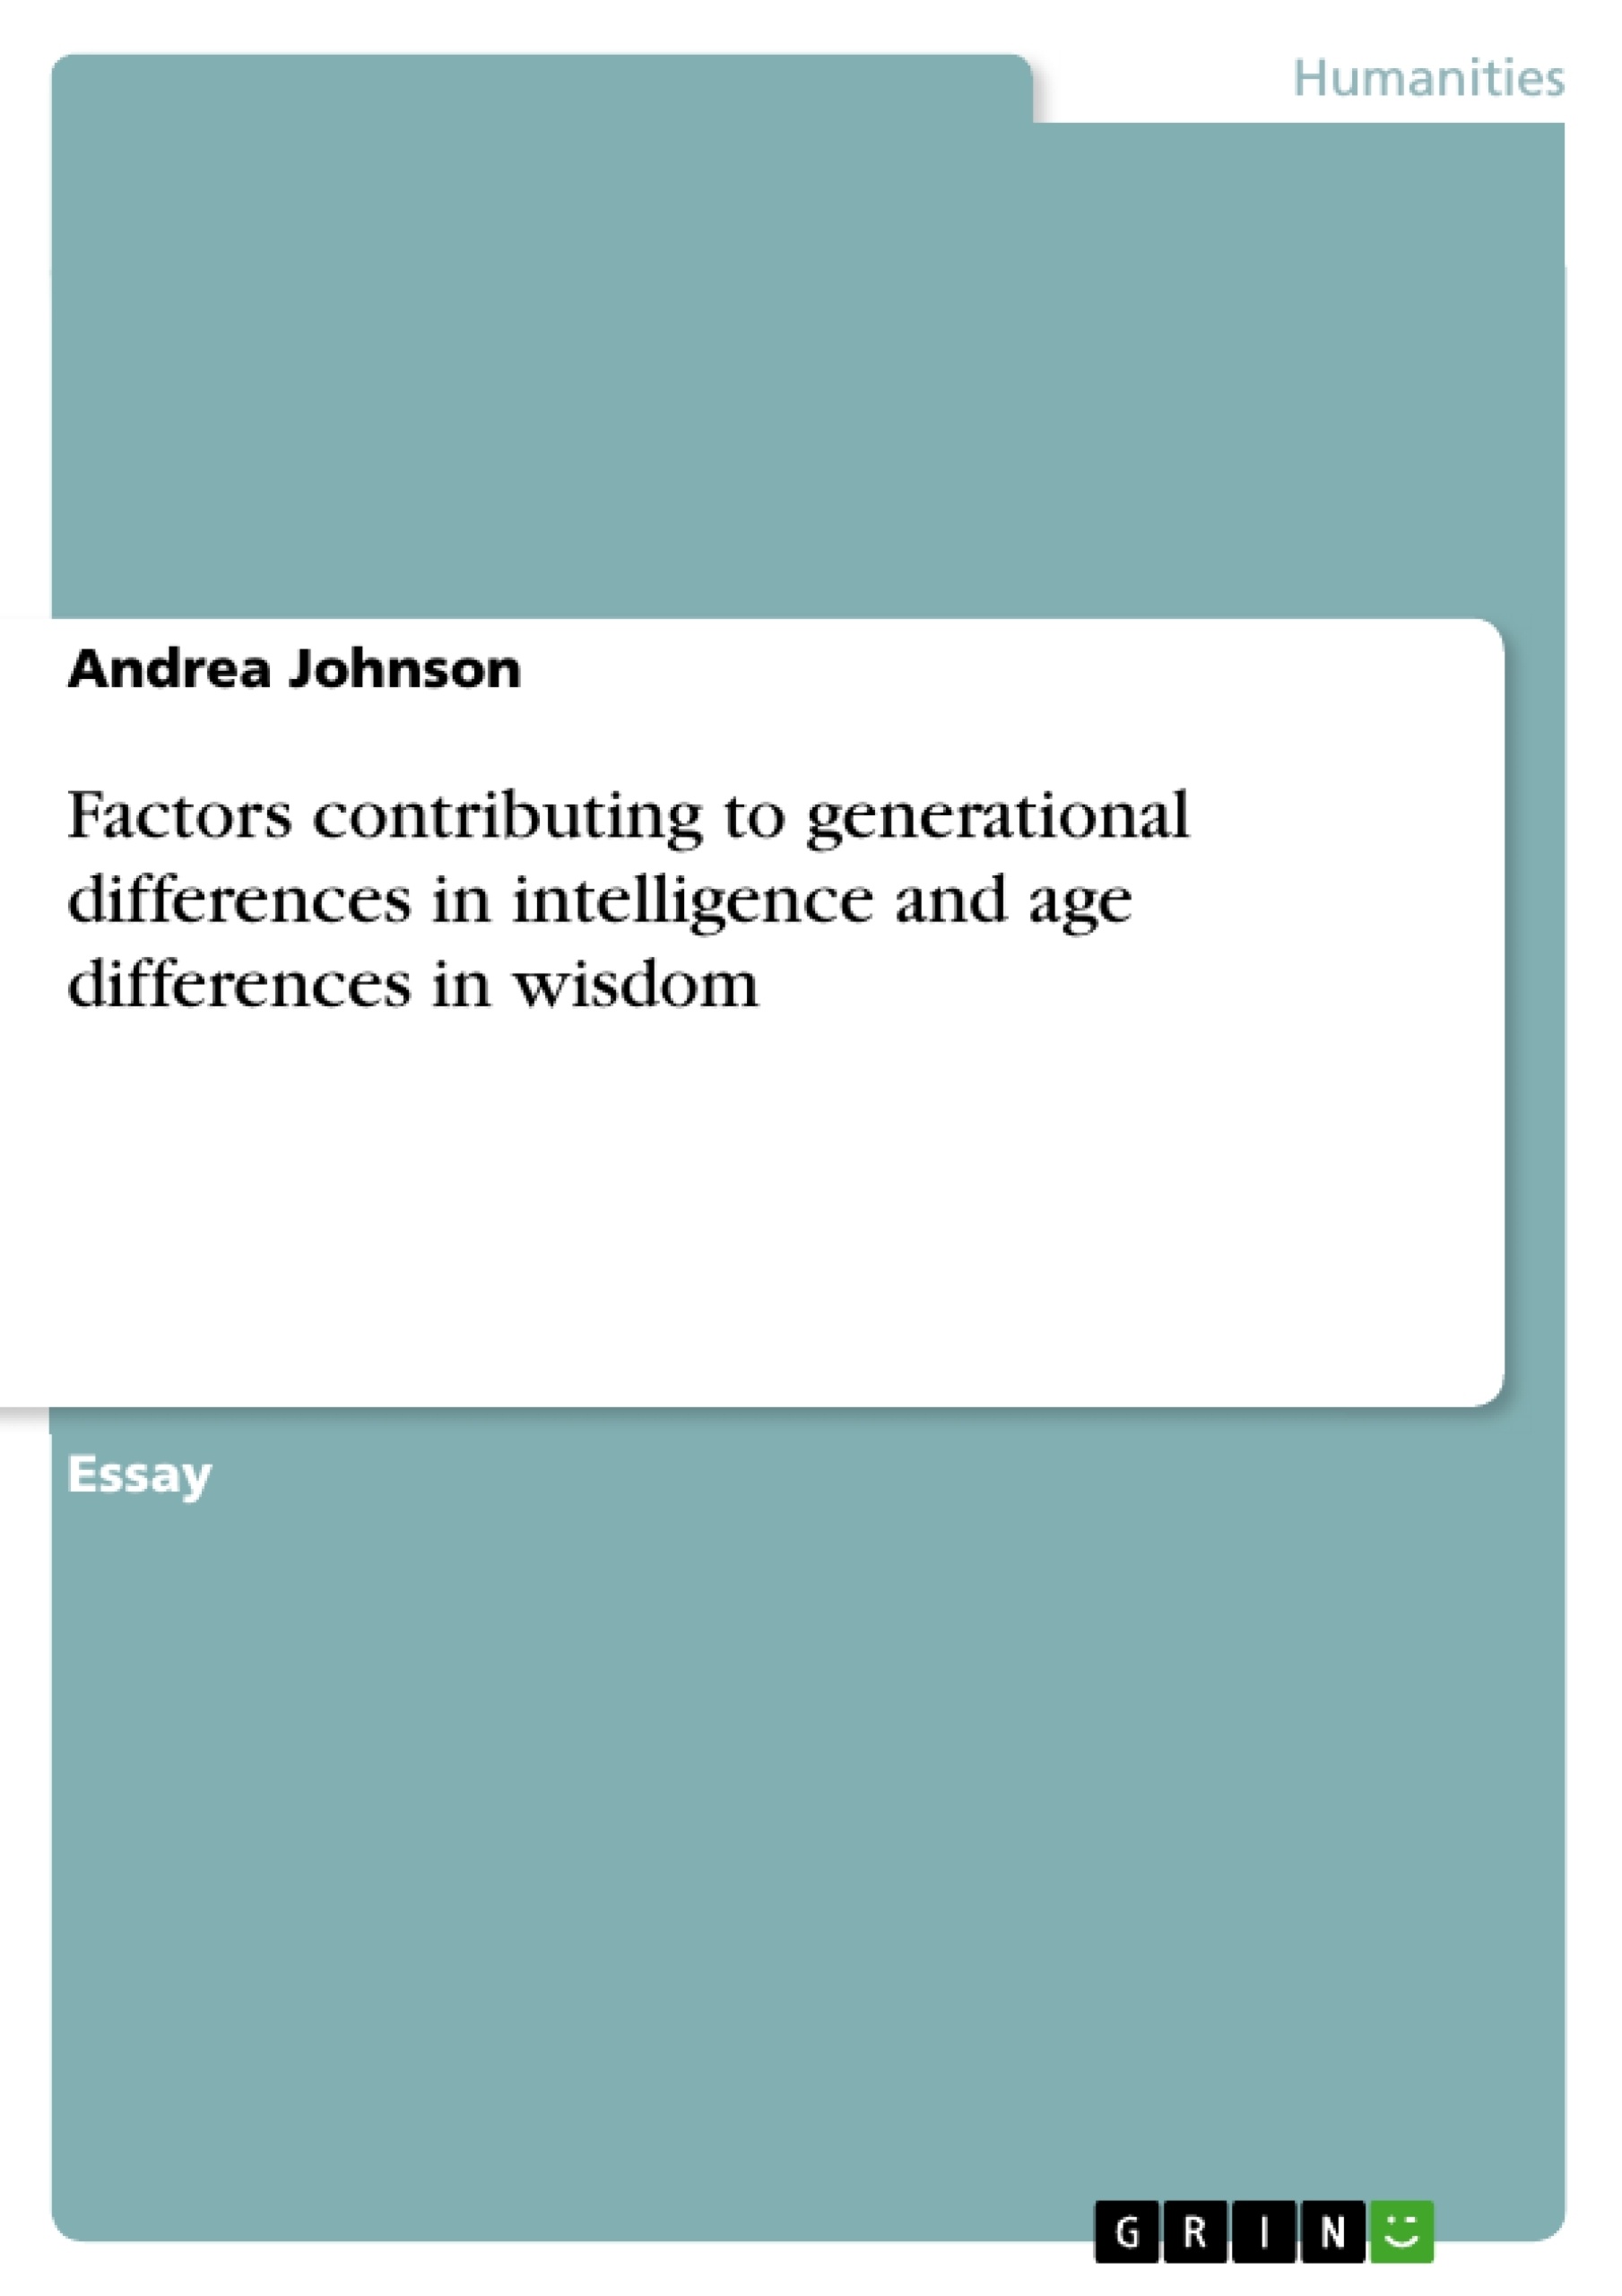 Titre: Factors contributing to generational differences in intelligence and age differences in wisdom